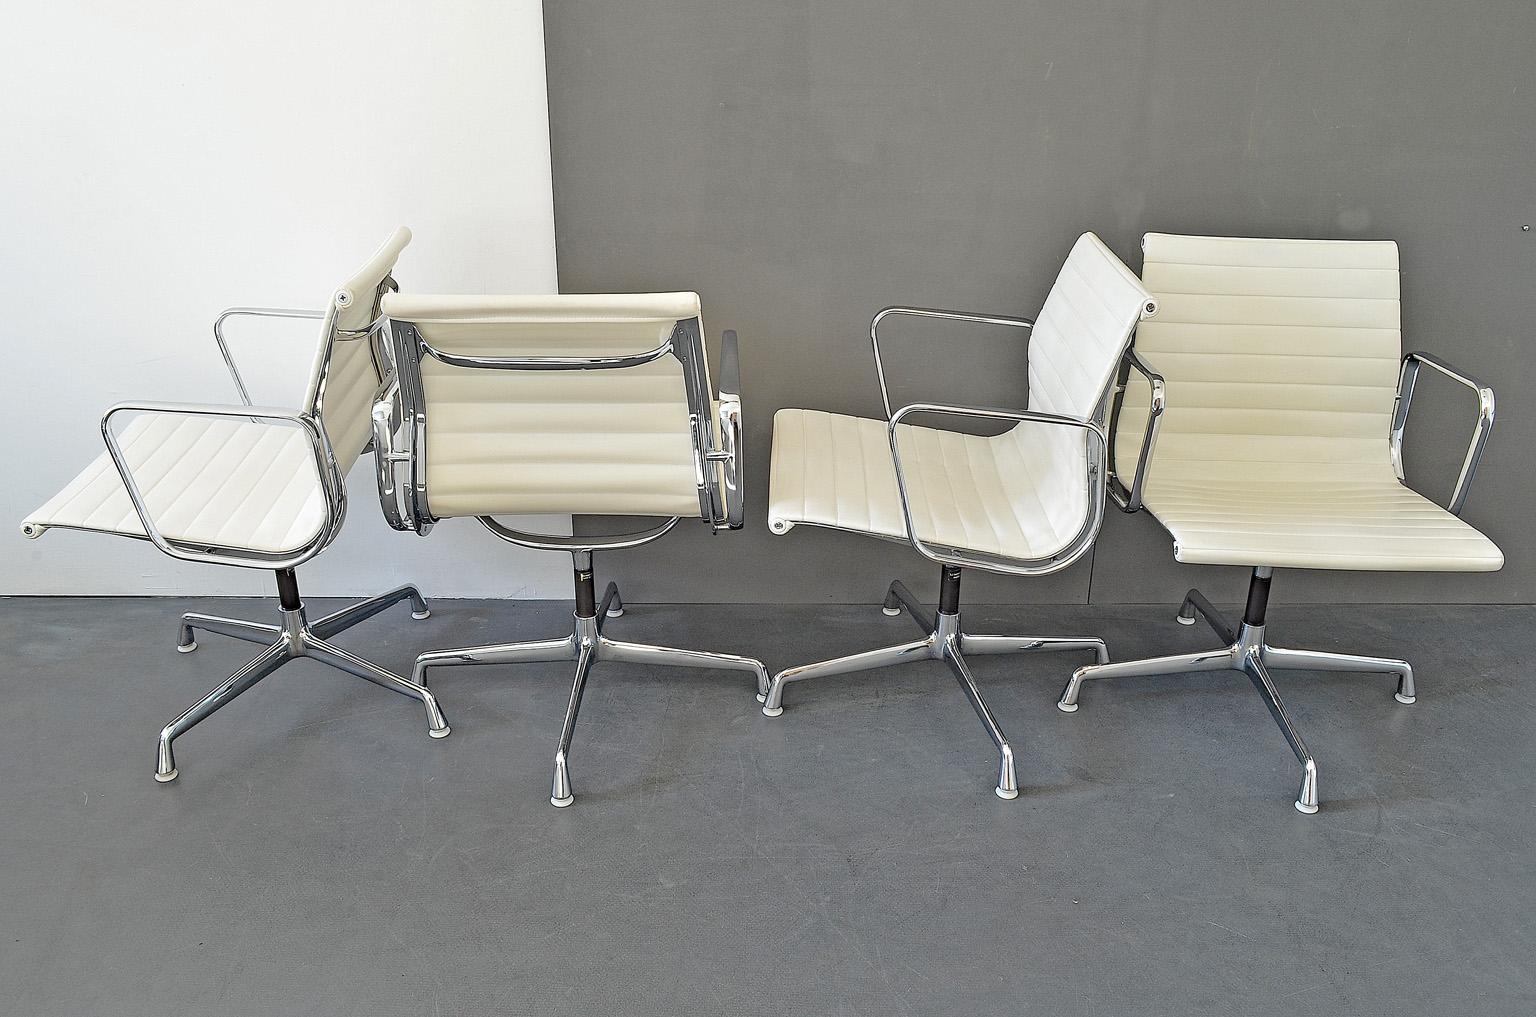 Seating Set with four Aluminium Swivel Chairs EA 108 and one Segmented table with round tabletop and aluminium frame. By Charles & Ray Eames for Hermann Miller made by Vitra, 1980s.
Measures: Chair: D x W x H = 57 x 58 x 88cm, SH = 49cm.
Table: H